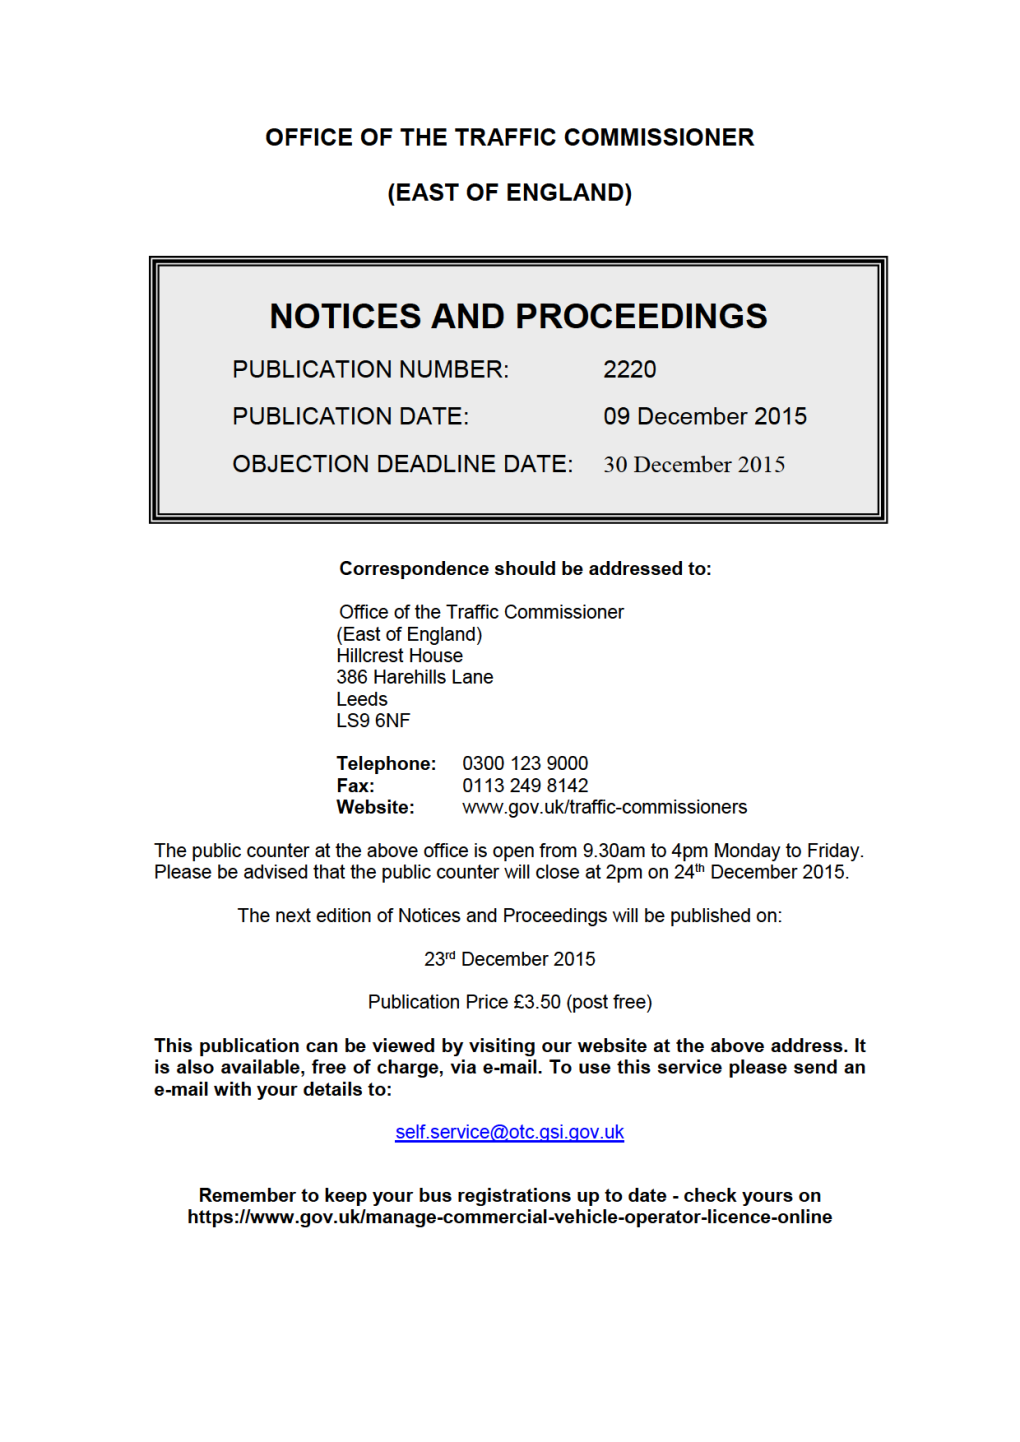 NOTICES and PROCEEDINGS 9 December 2015